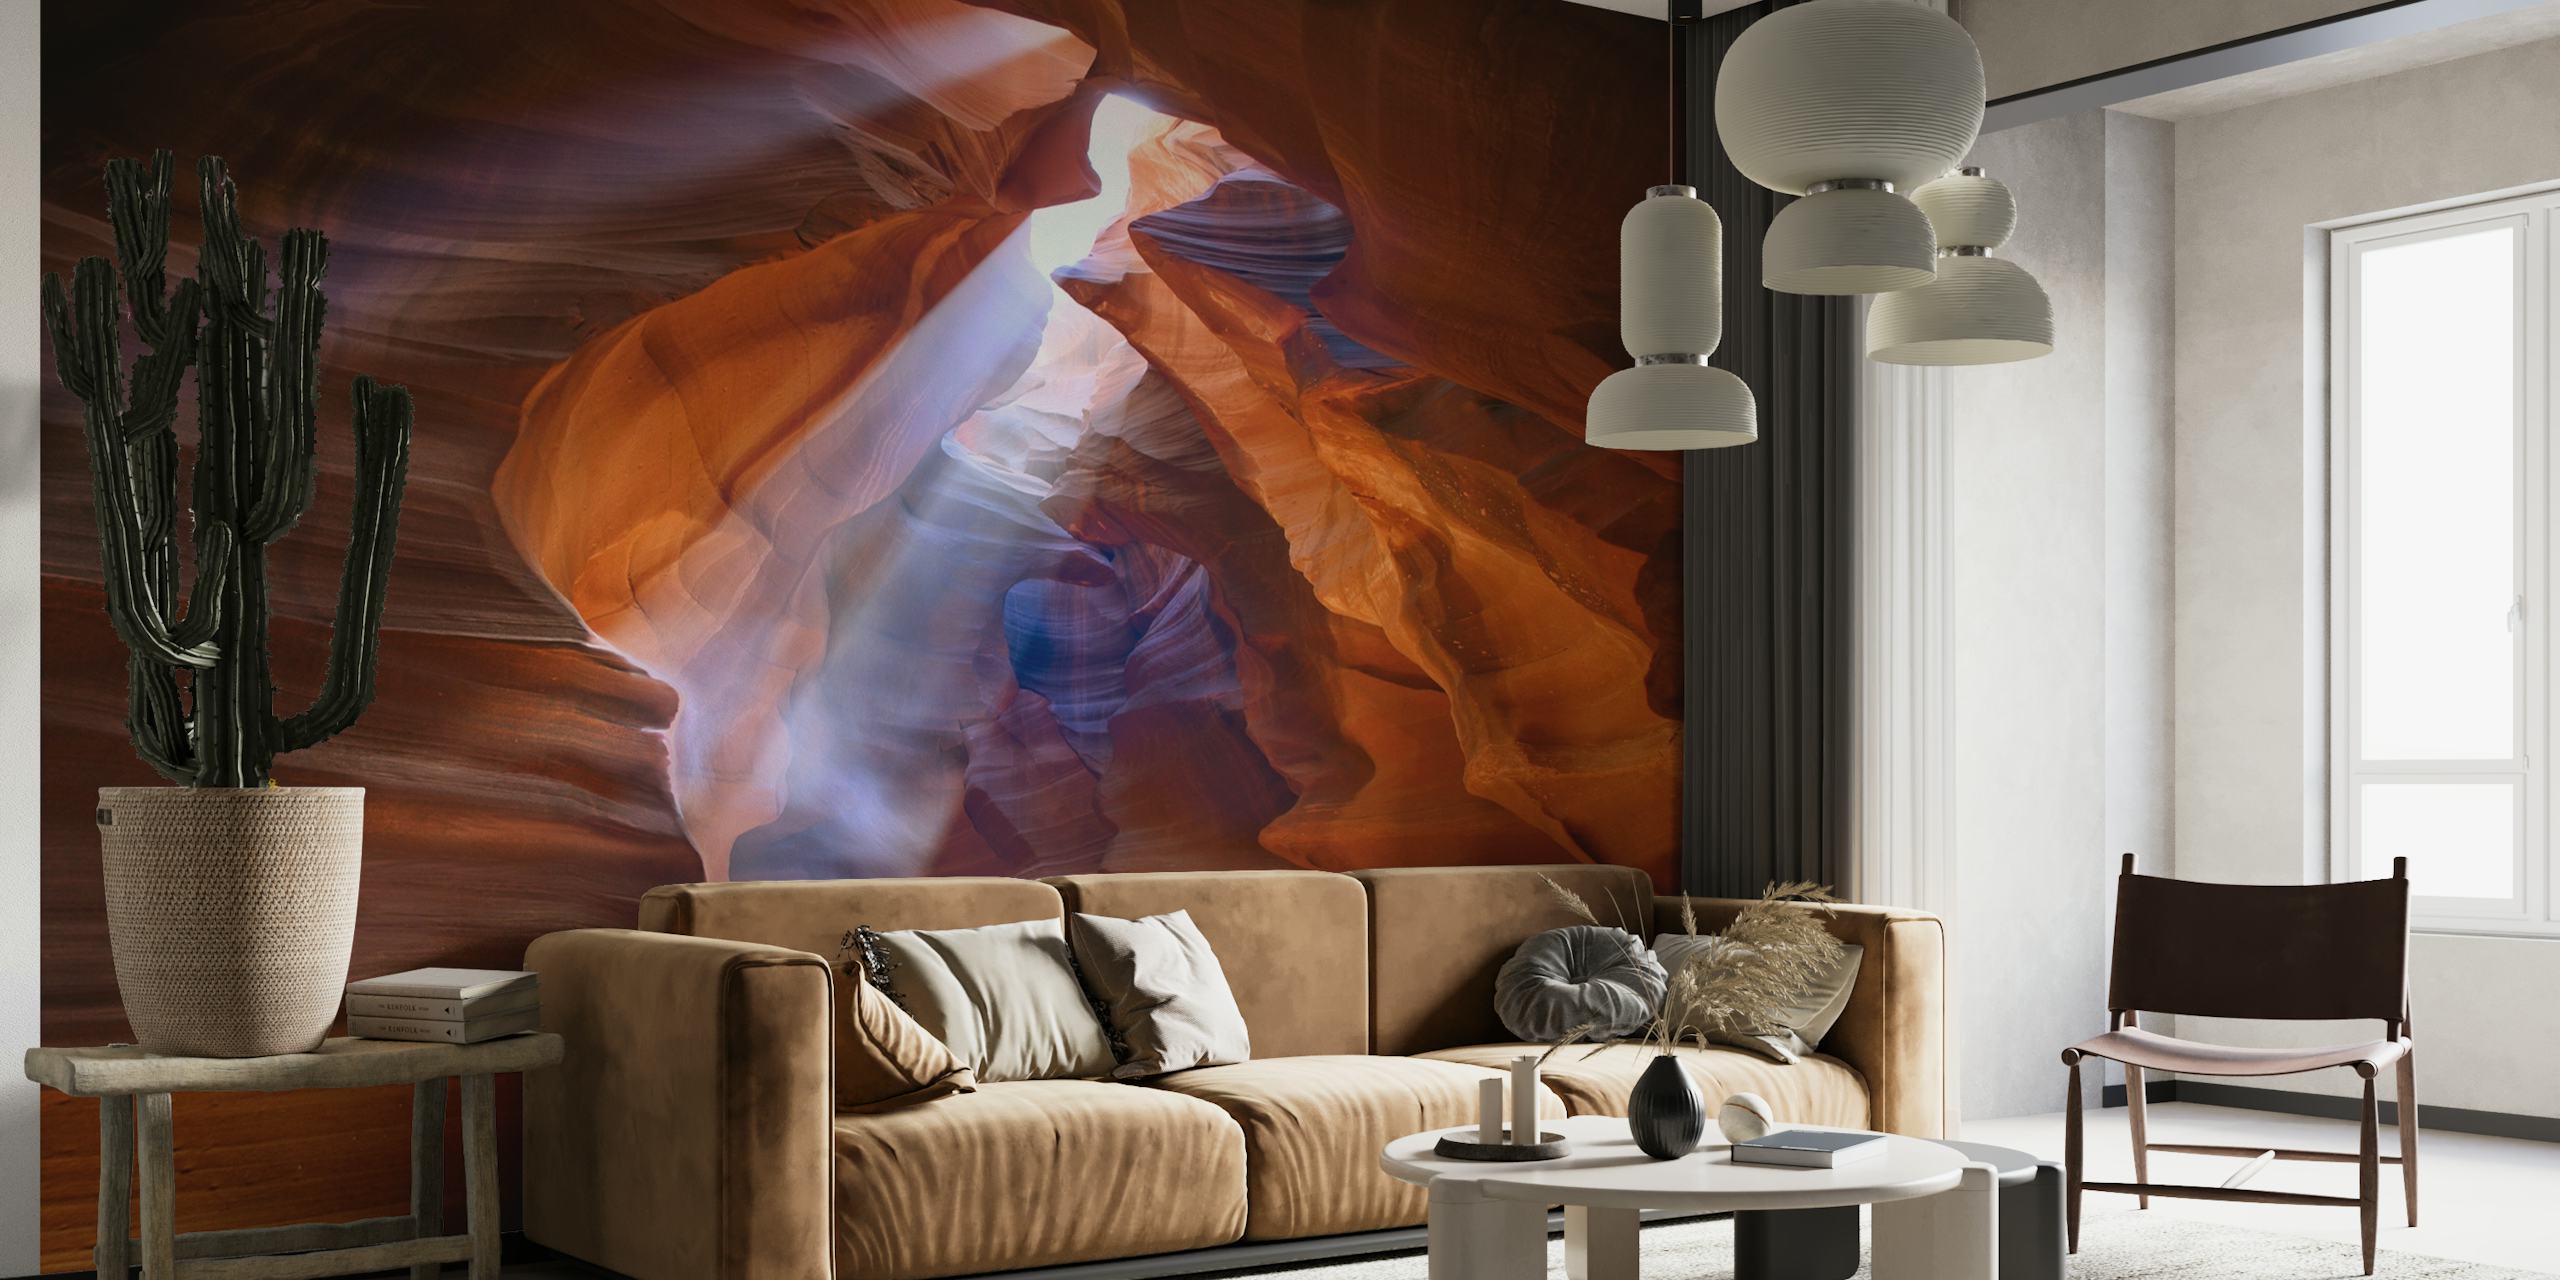 Sunlit canyon wall mural with interplays of light and shadow in warm earth tones.